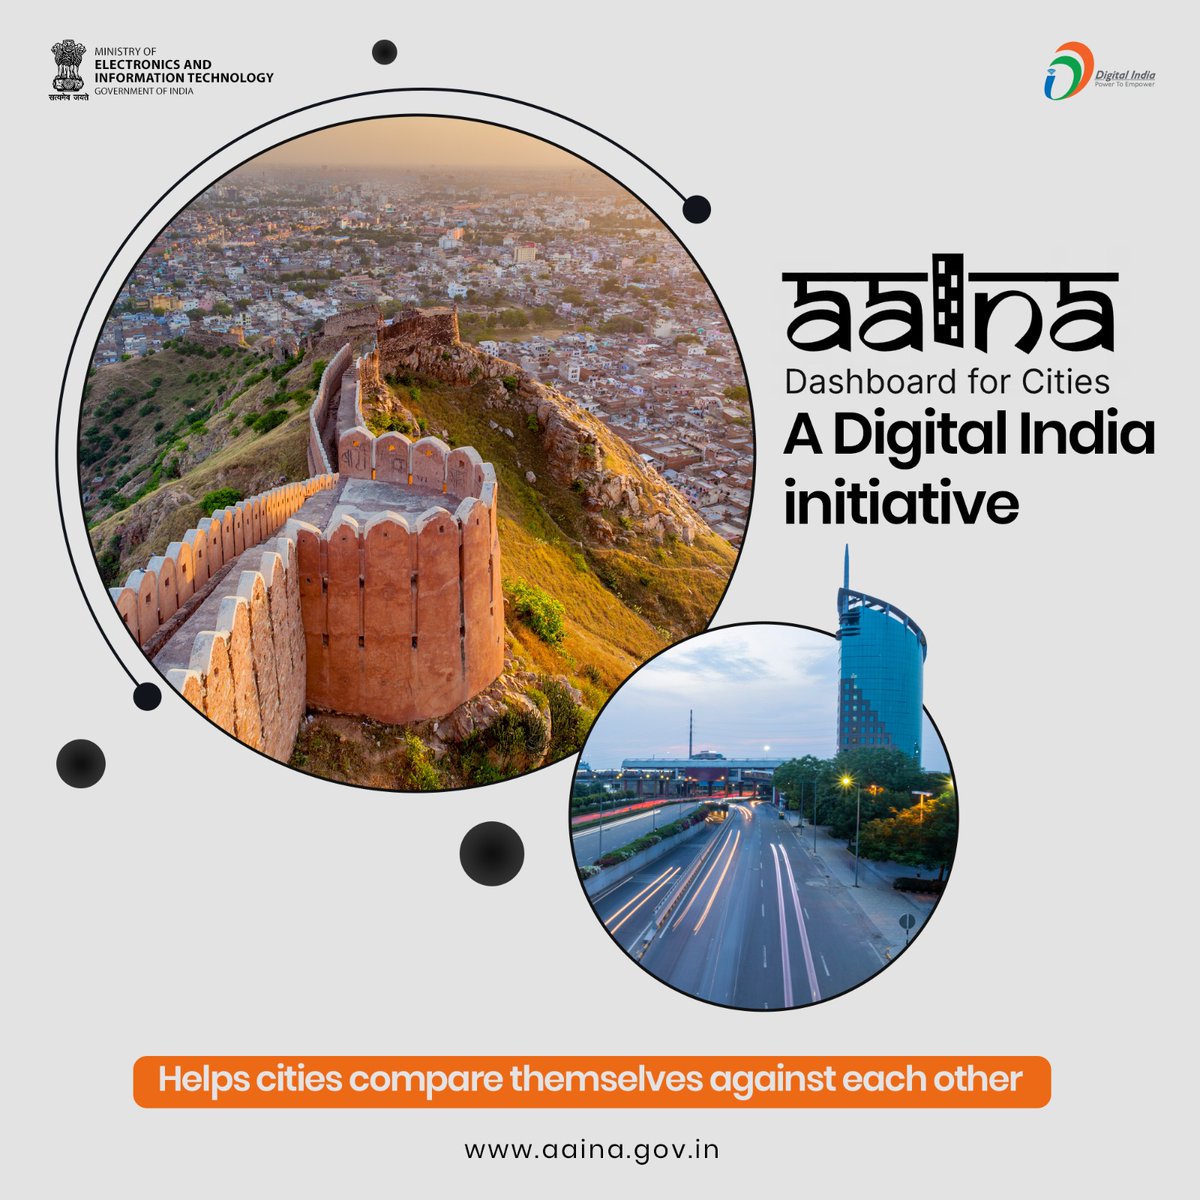 AAINA – Dashboard for cities envisages to serve as a tool for comparing similarly placed Urban Local Bodies (ULBs) in India and promoting peer learning amongst them. Visit aaina.gov.in #DigitalIndia @MoHUA_India